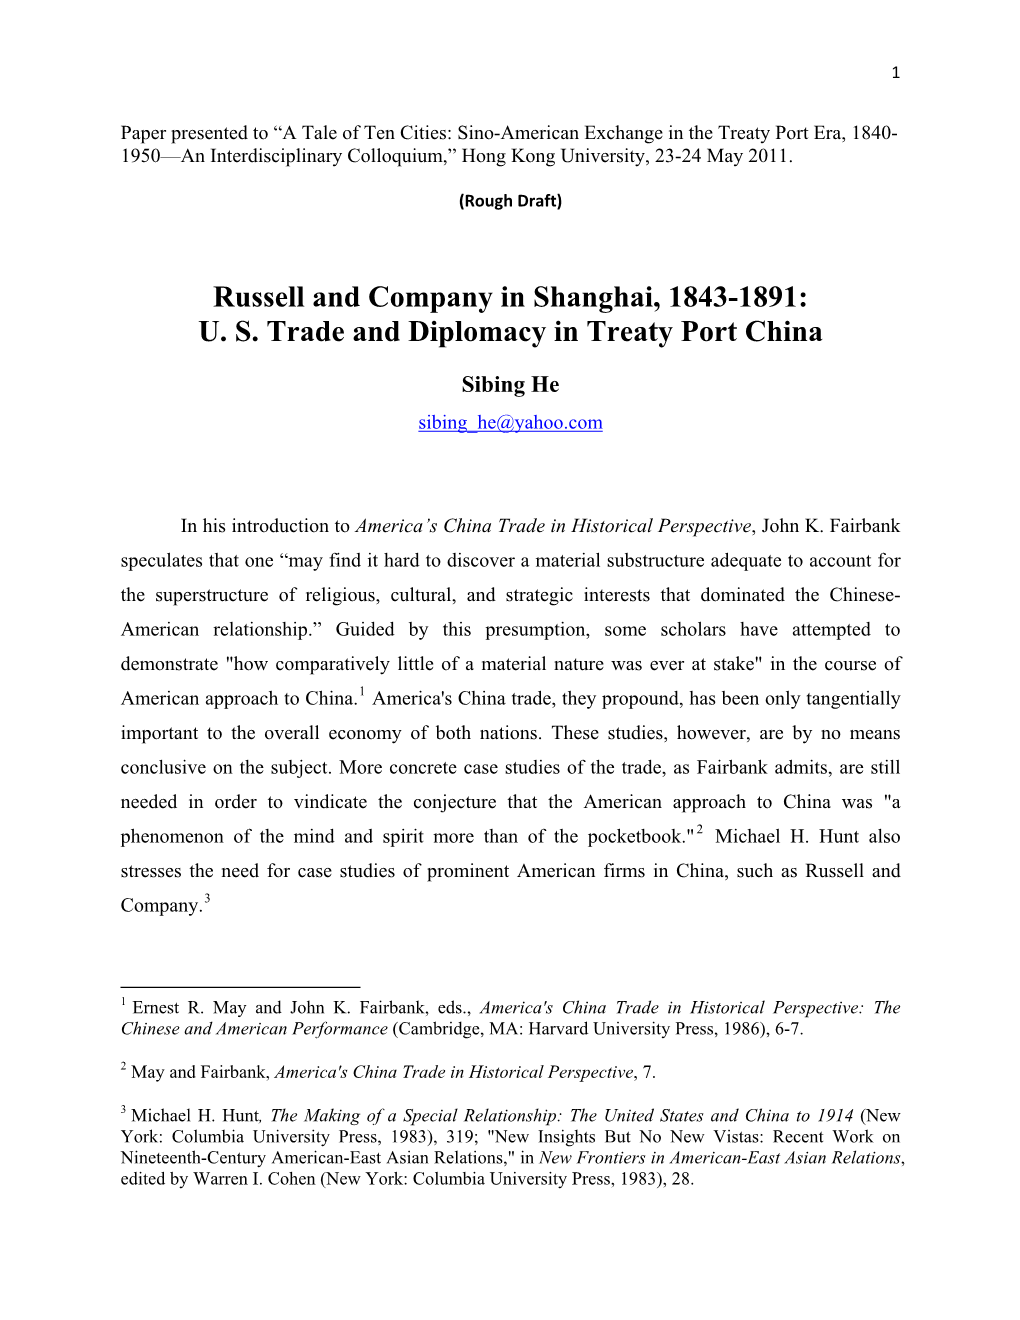 Russell and Company in Shanghai, 1843-1891: U. S. Trade and Diplomacy in Treaty Port China